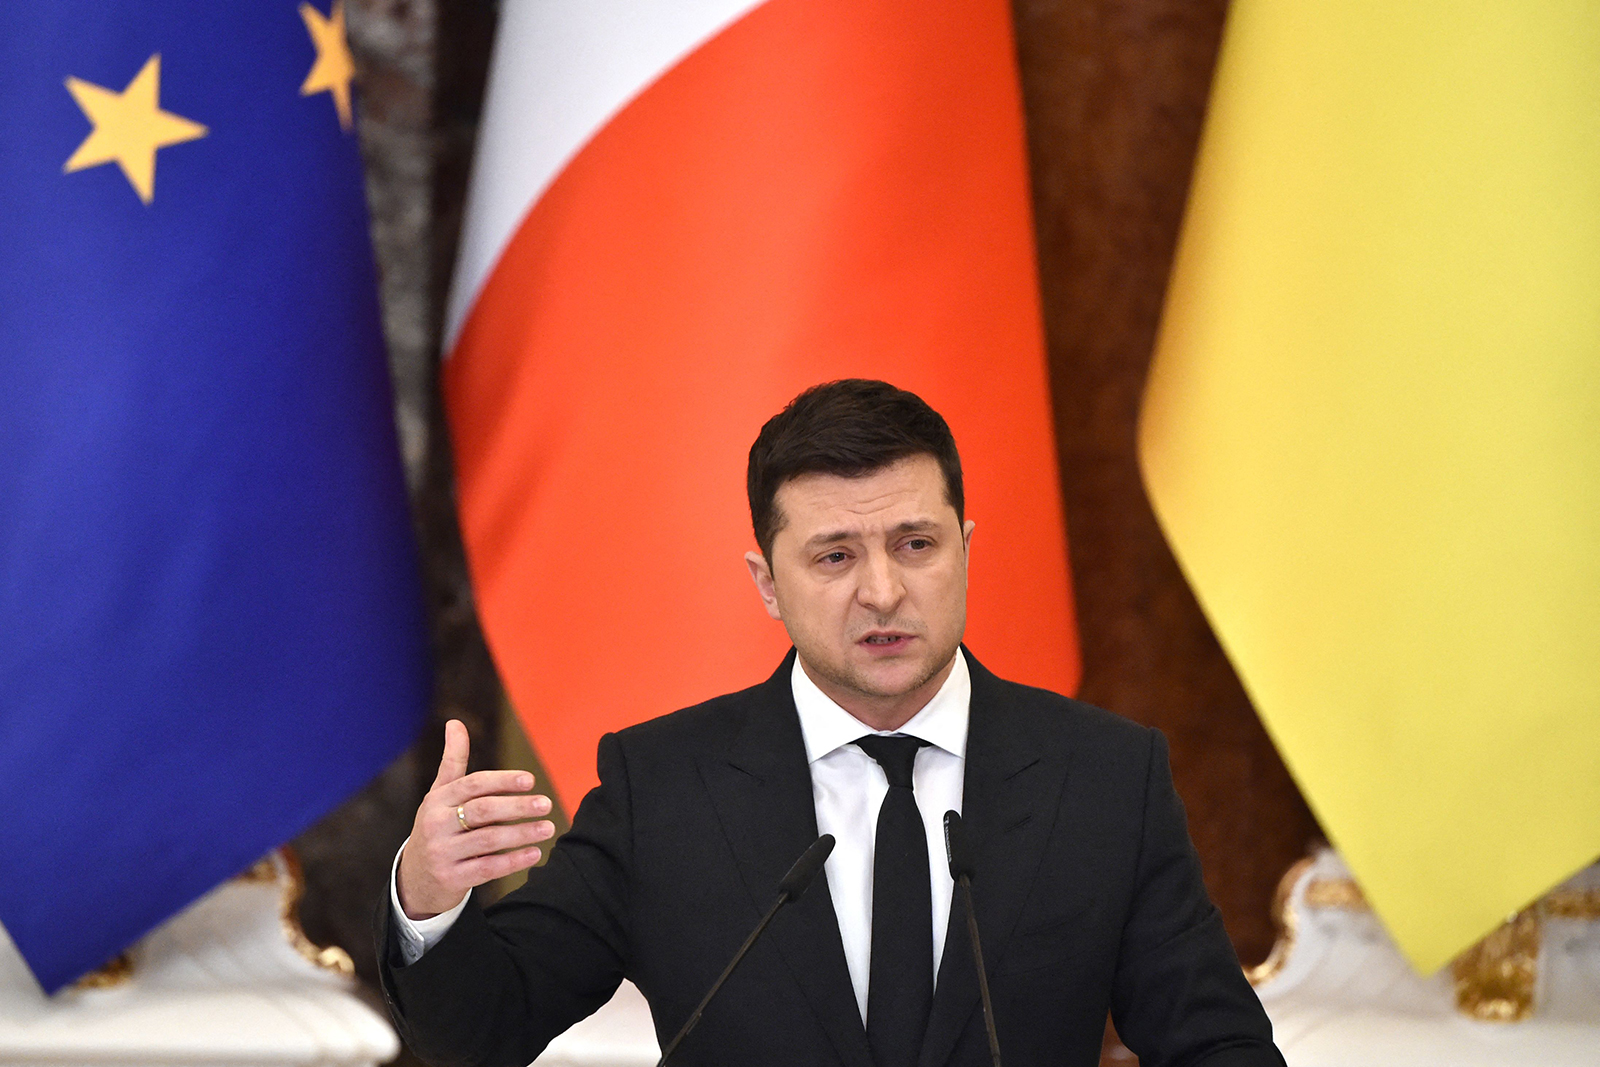 Ukrainian President Volodymyr Zelensky gestures during a joint press conference with French President following their meeting in Kyiv on February 8.